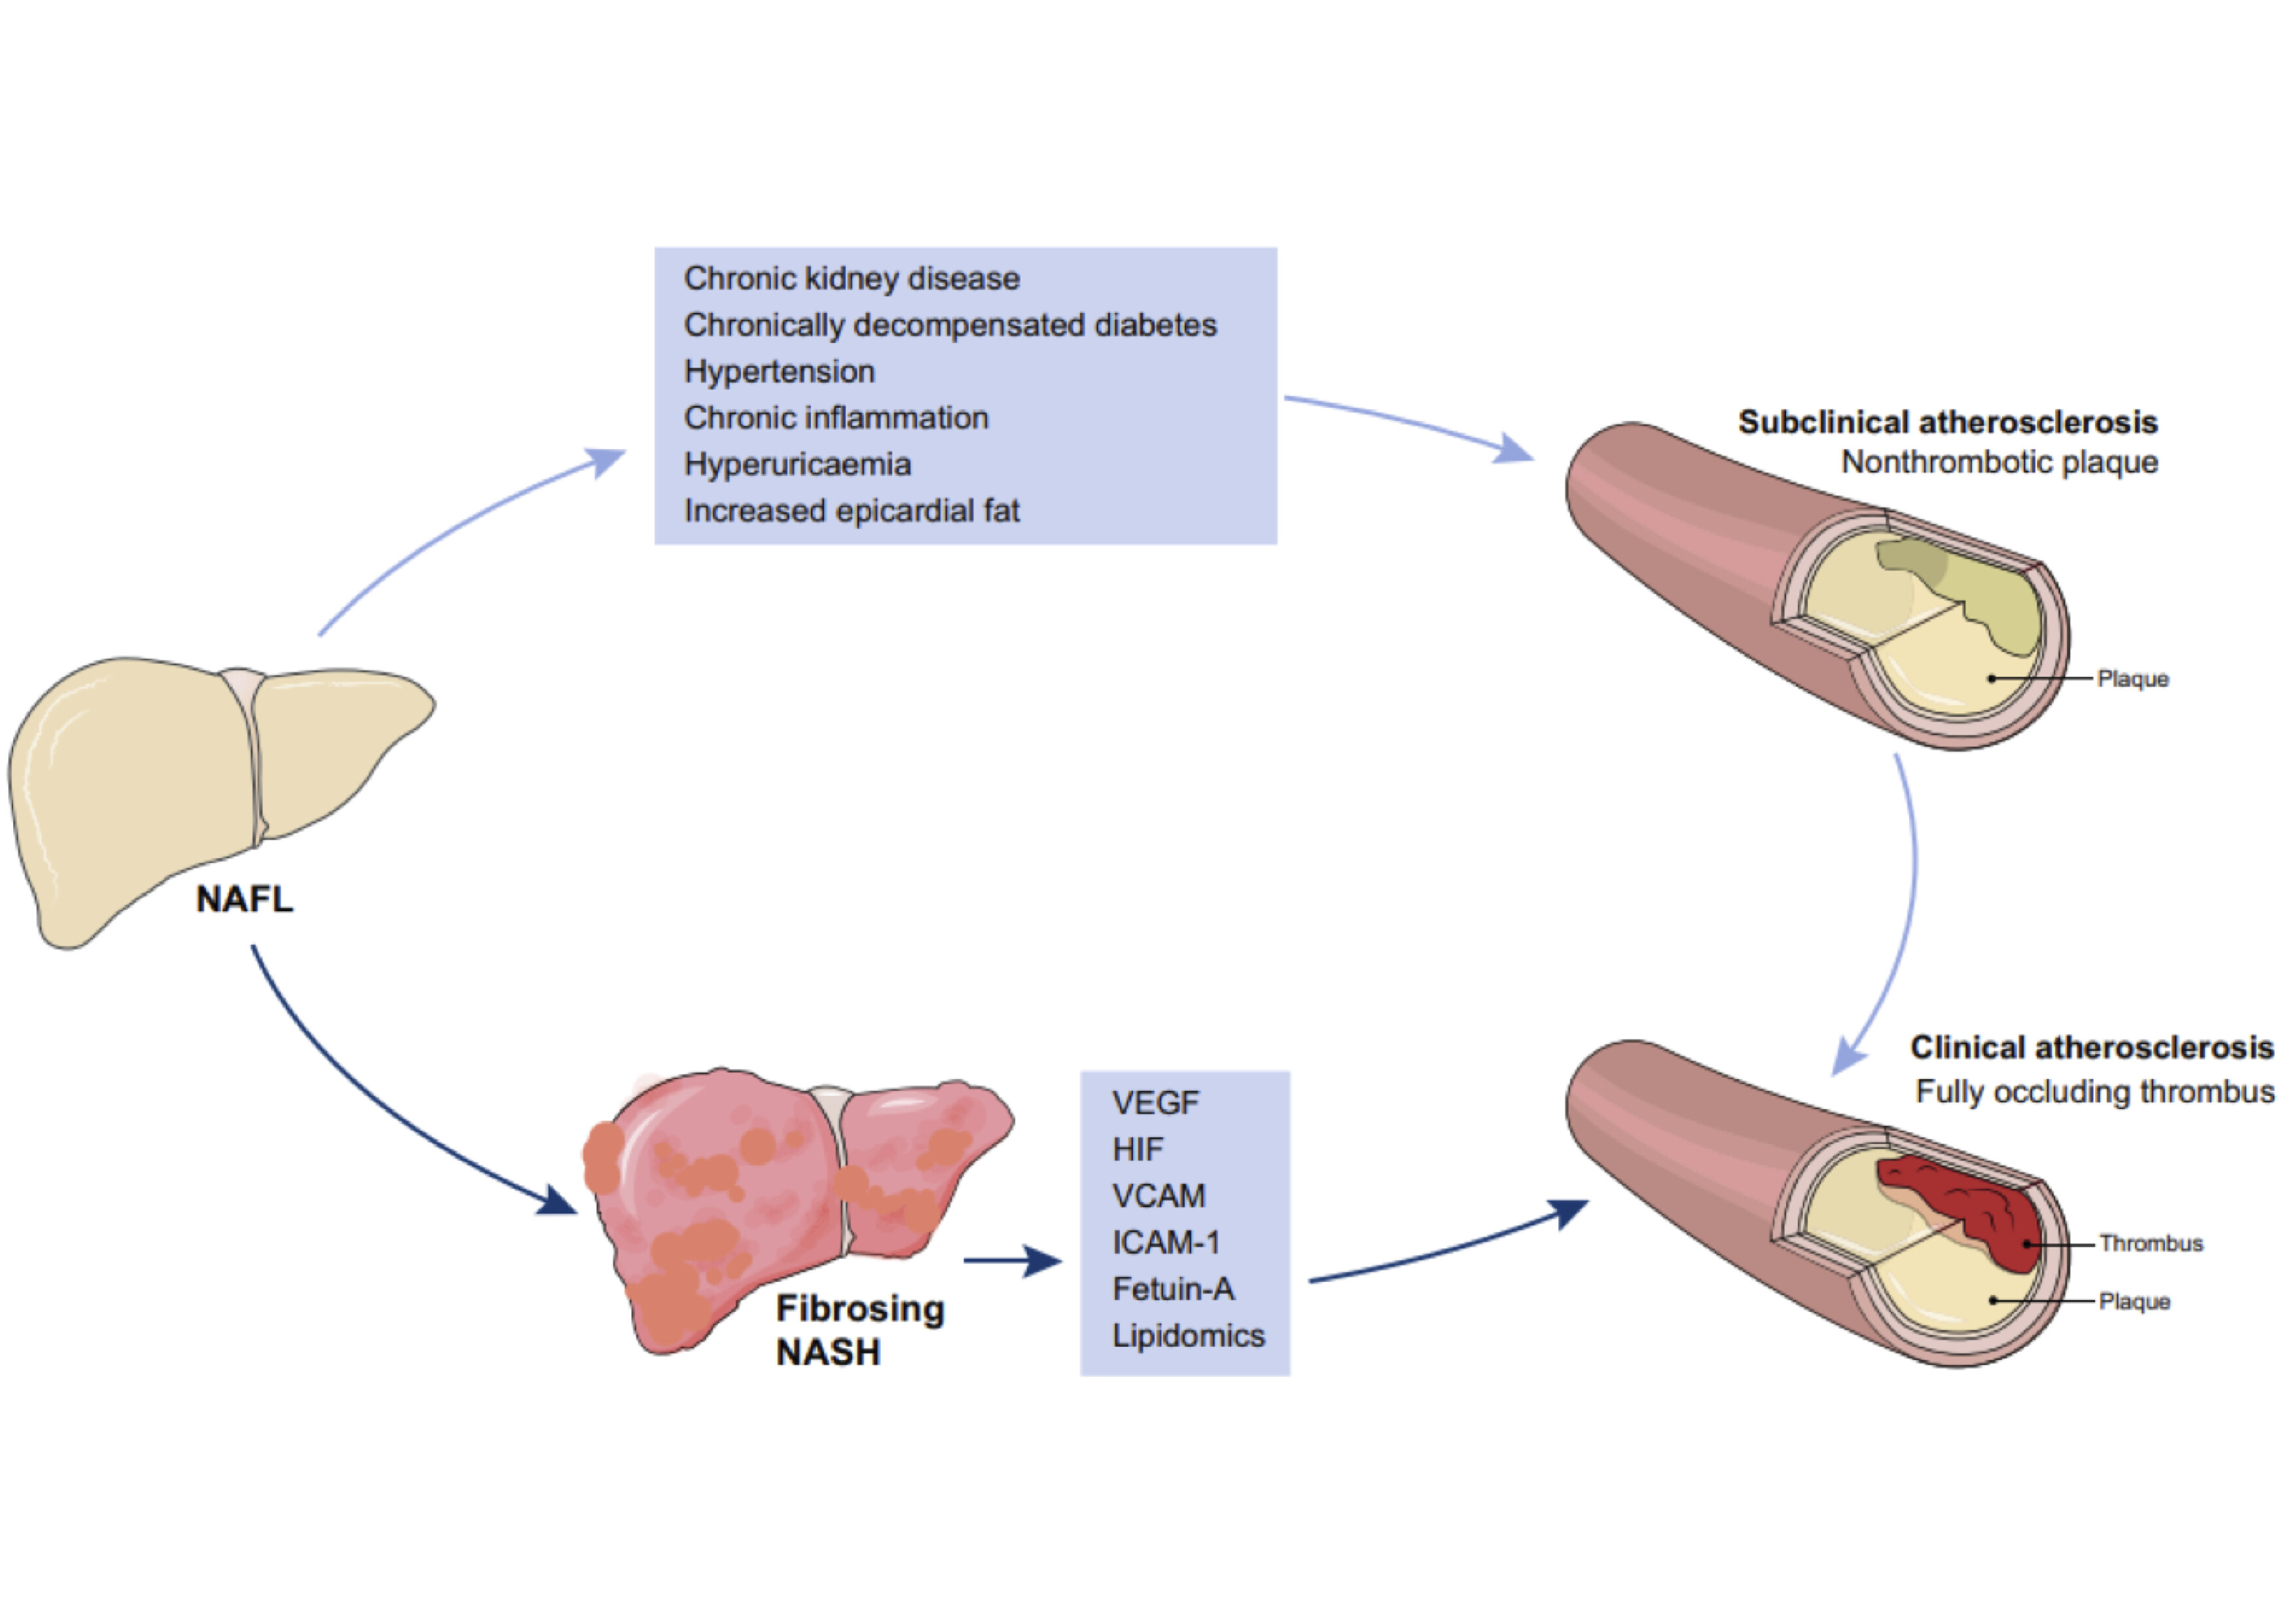 Liver fibrosis in nonalcoholic fatty liver disease patients: noninvasive evaluation and correlation with cardiovascular disease and mortality